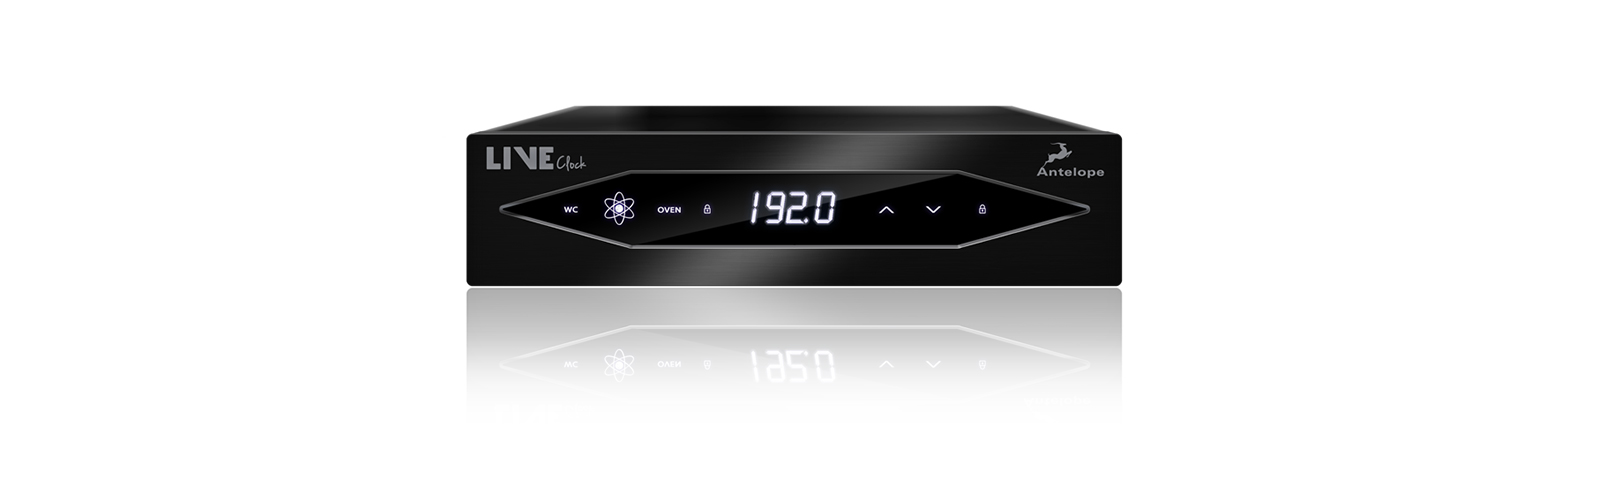 conectivity liveclock front